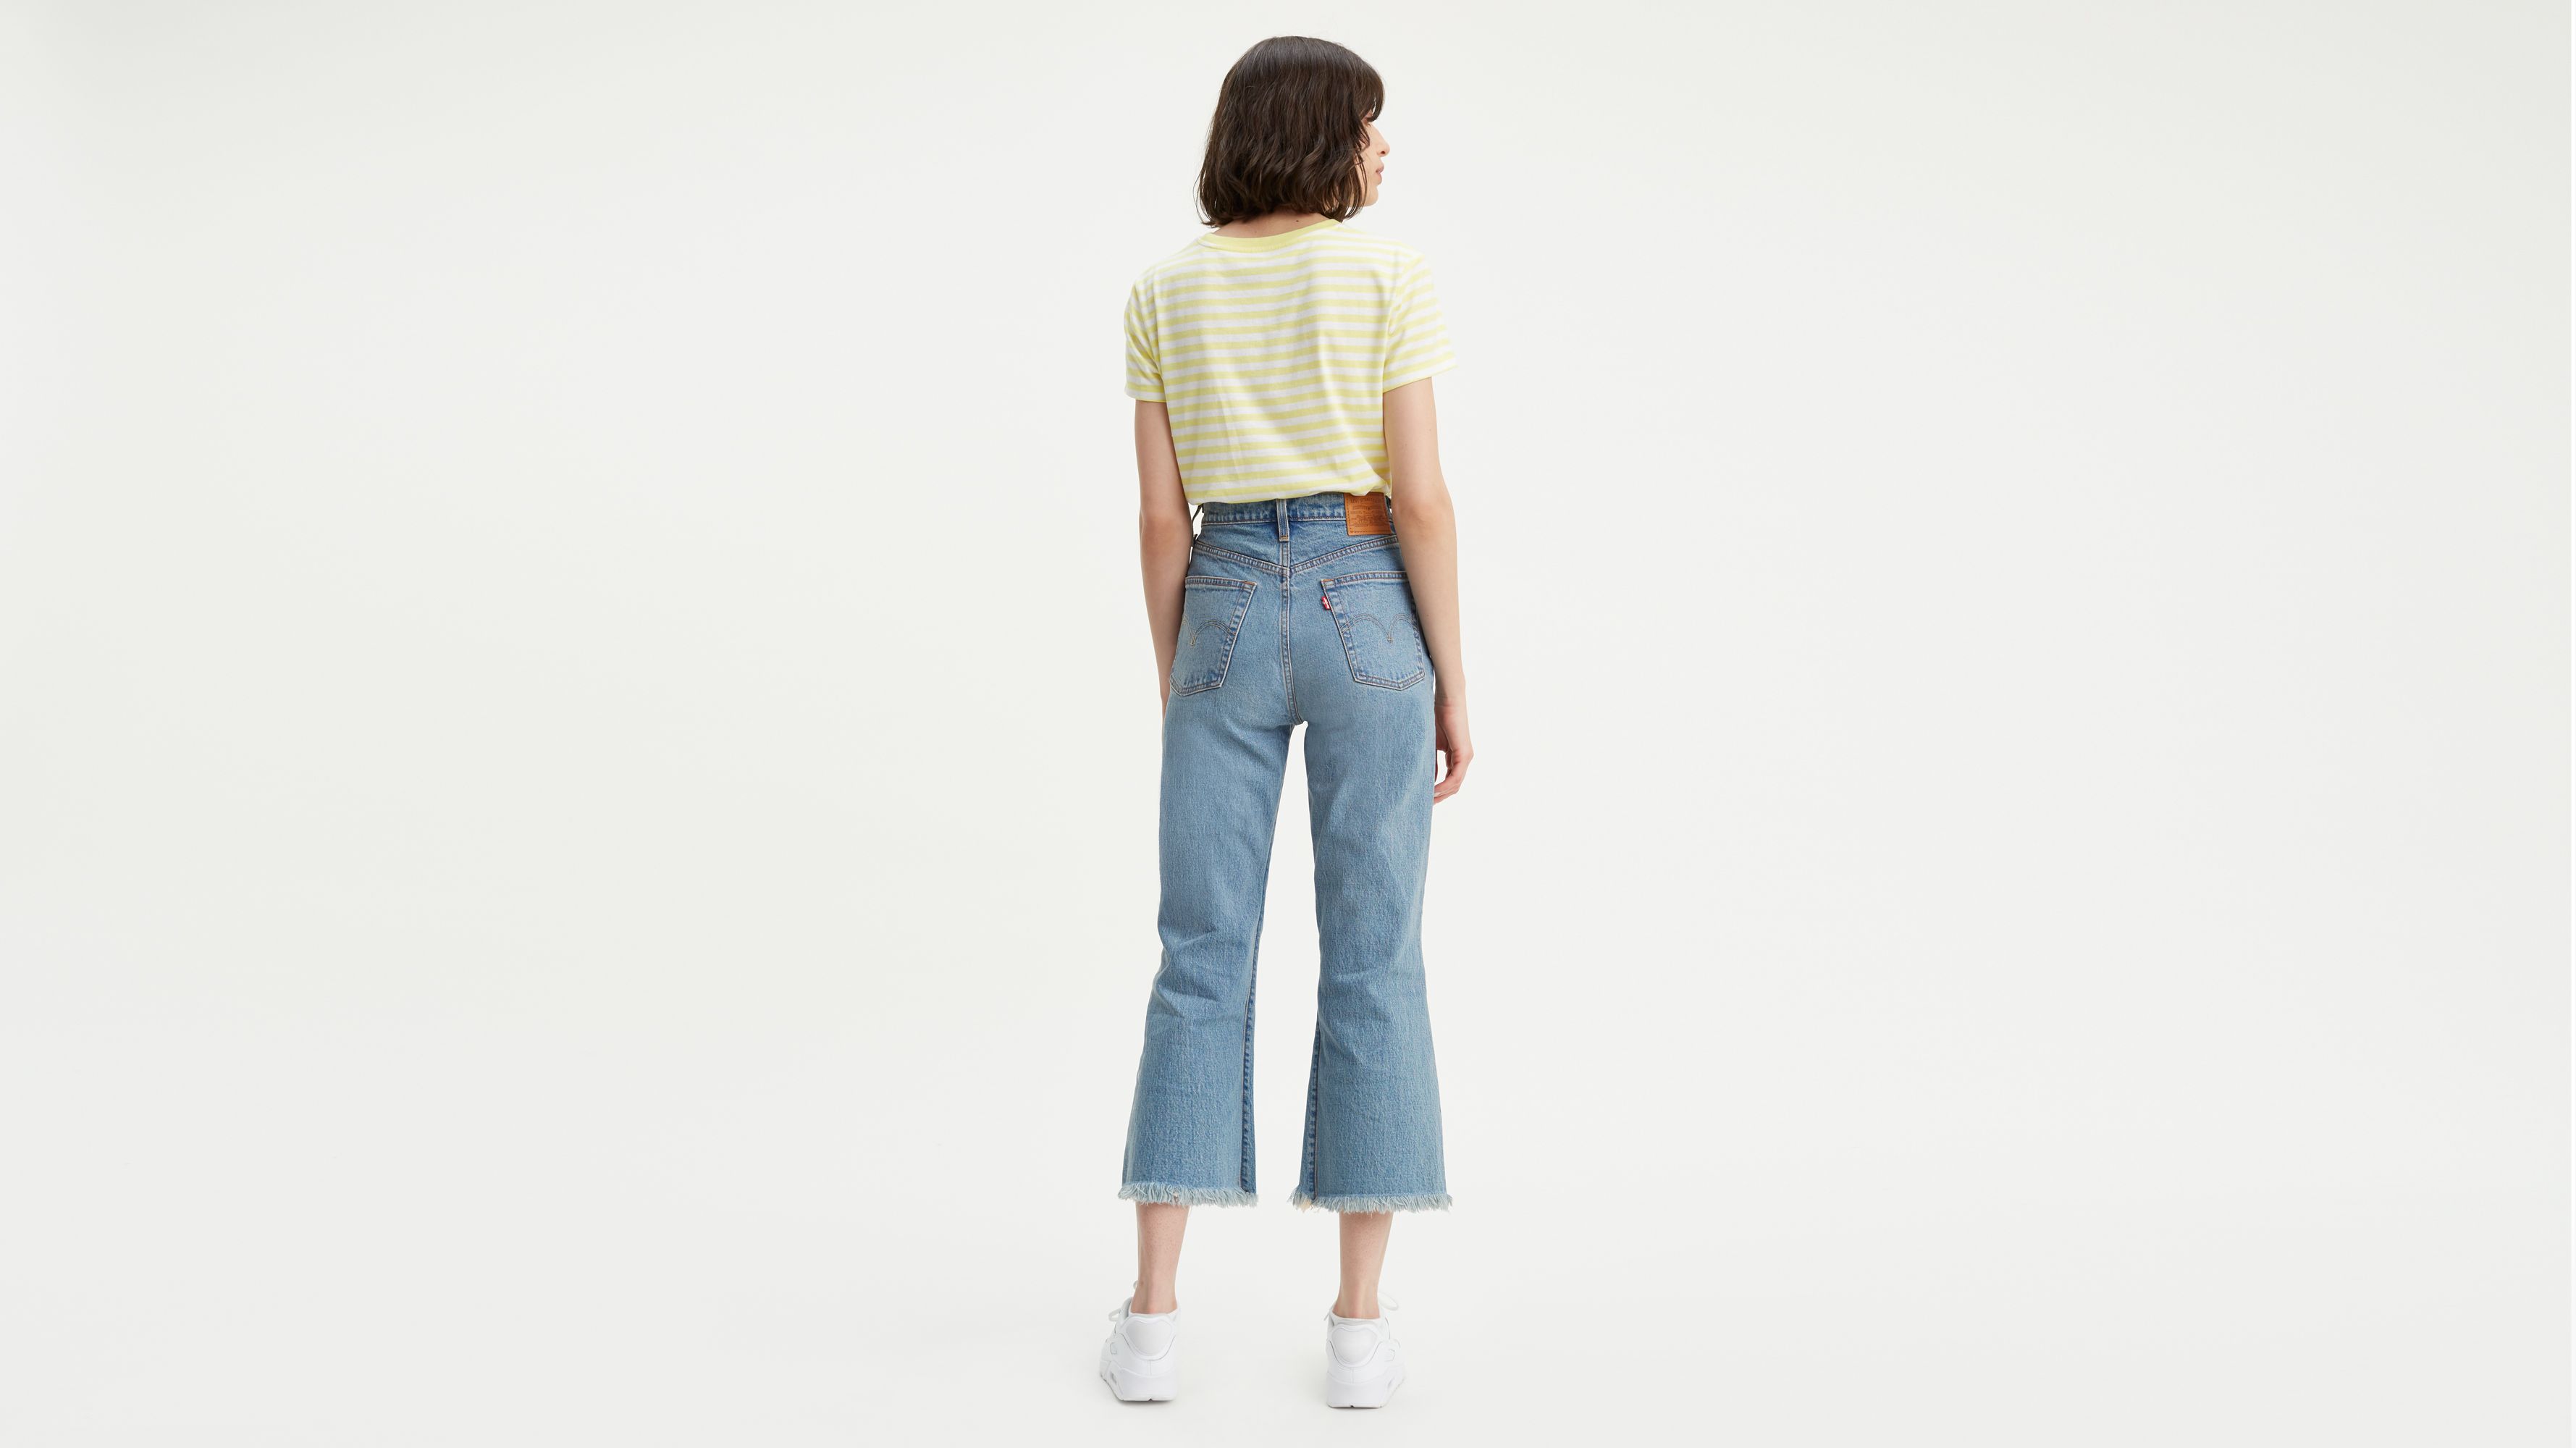 ribcage cropped flare women's jeans